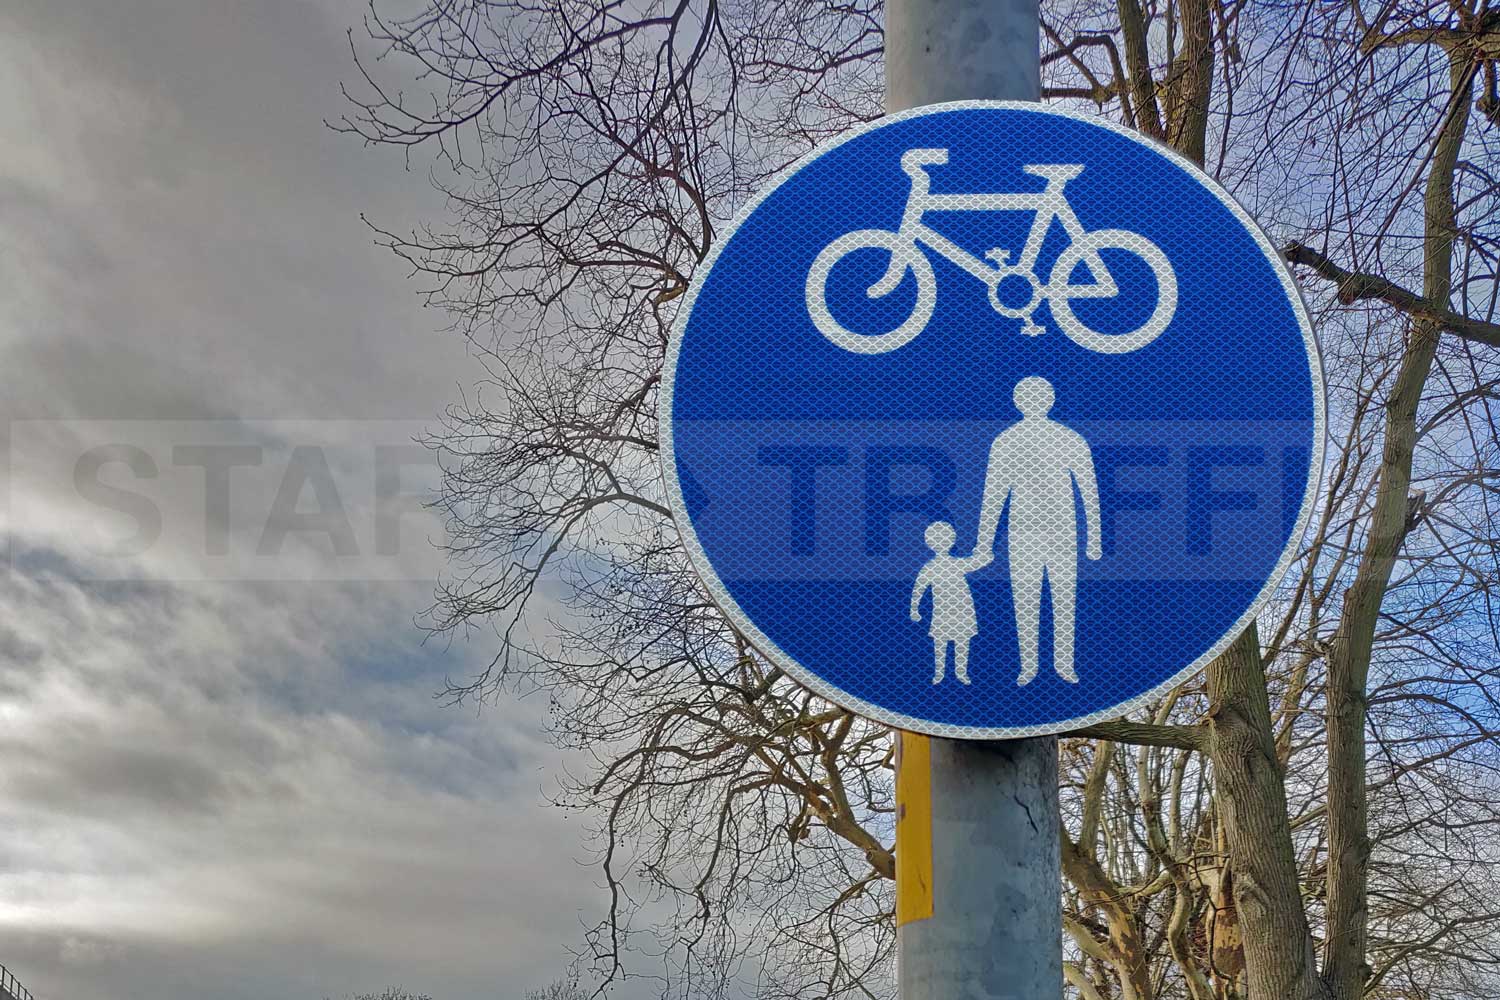 Cycle & Pedestrian route only